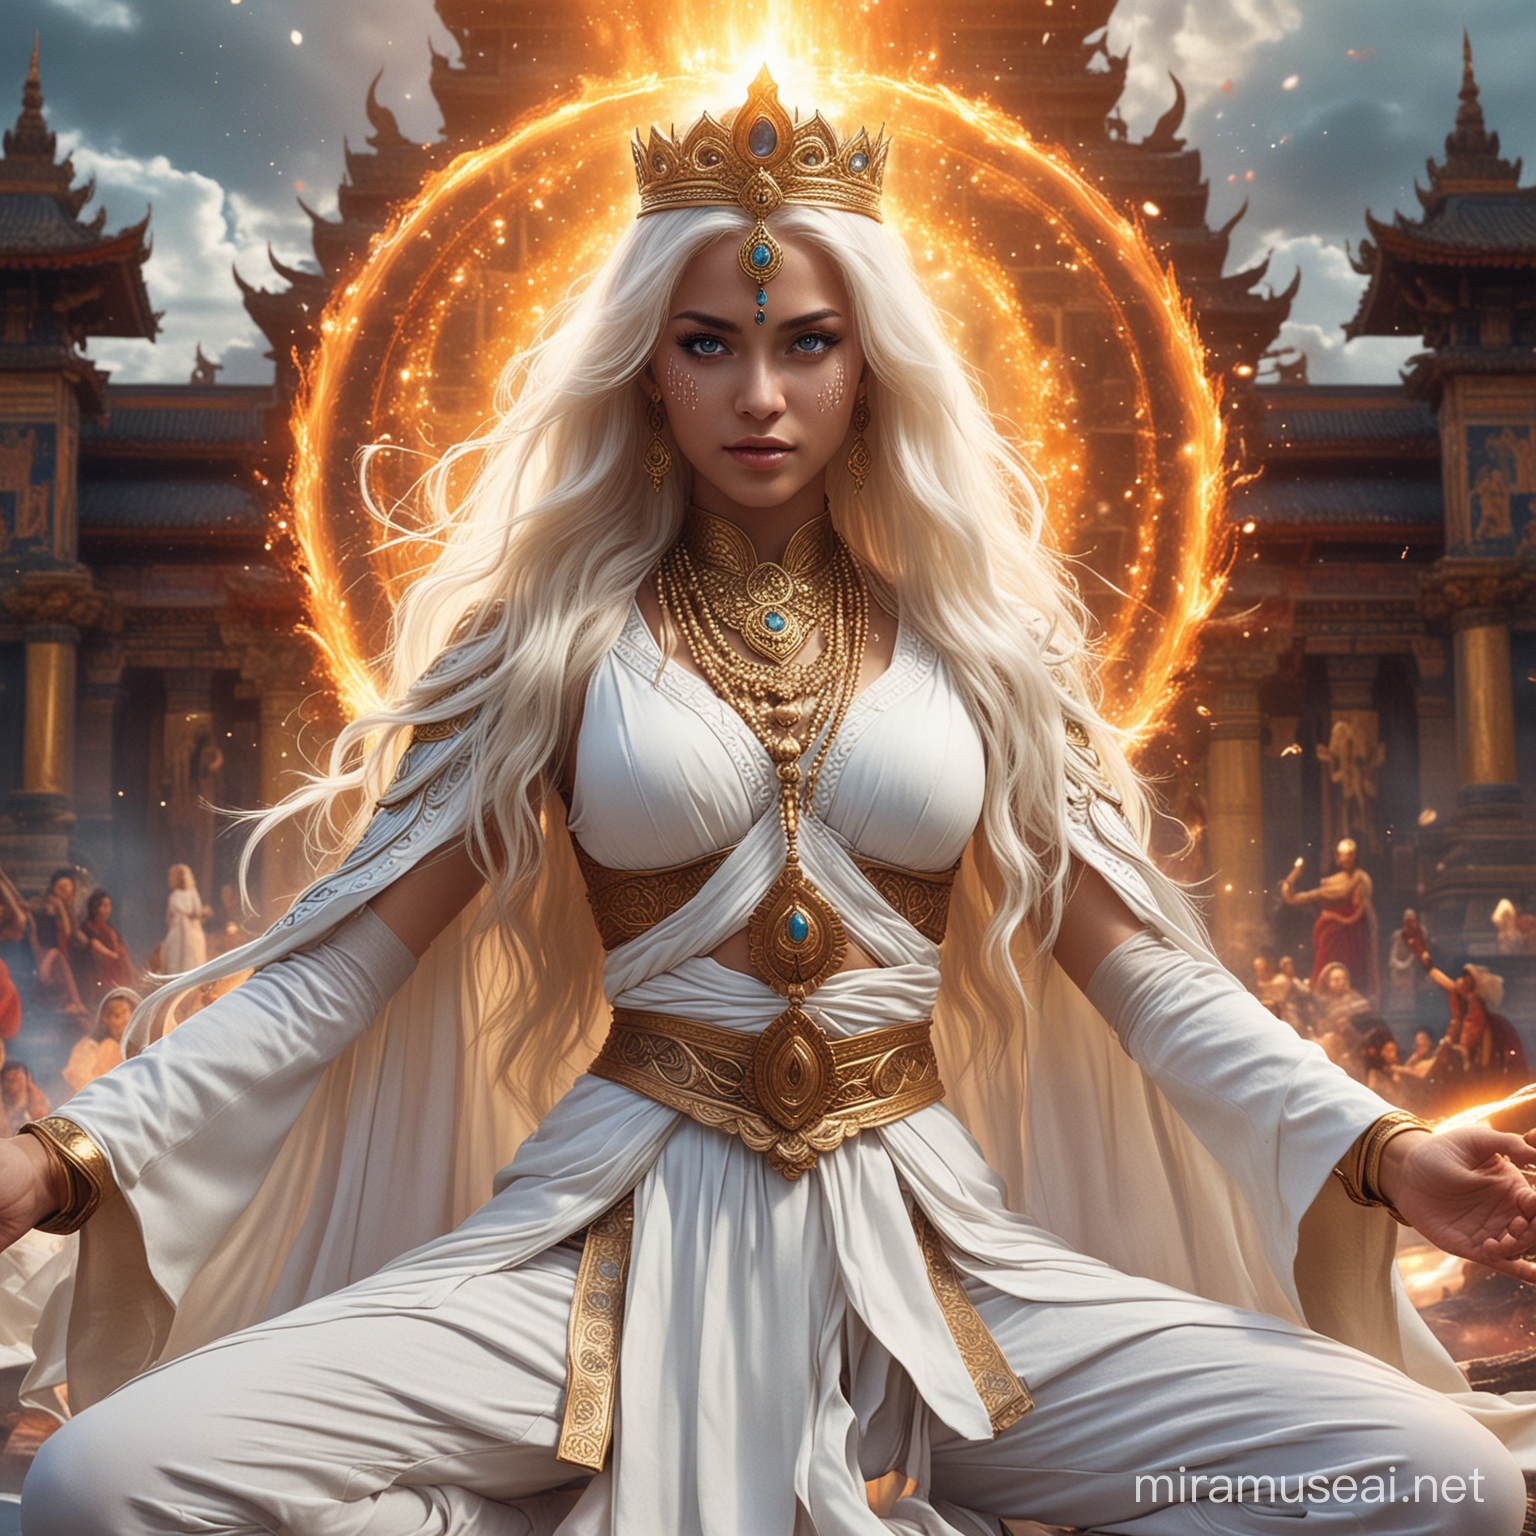 Empress Hindu Goddess Surrounded by Cosmic Energy and Fire Circles